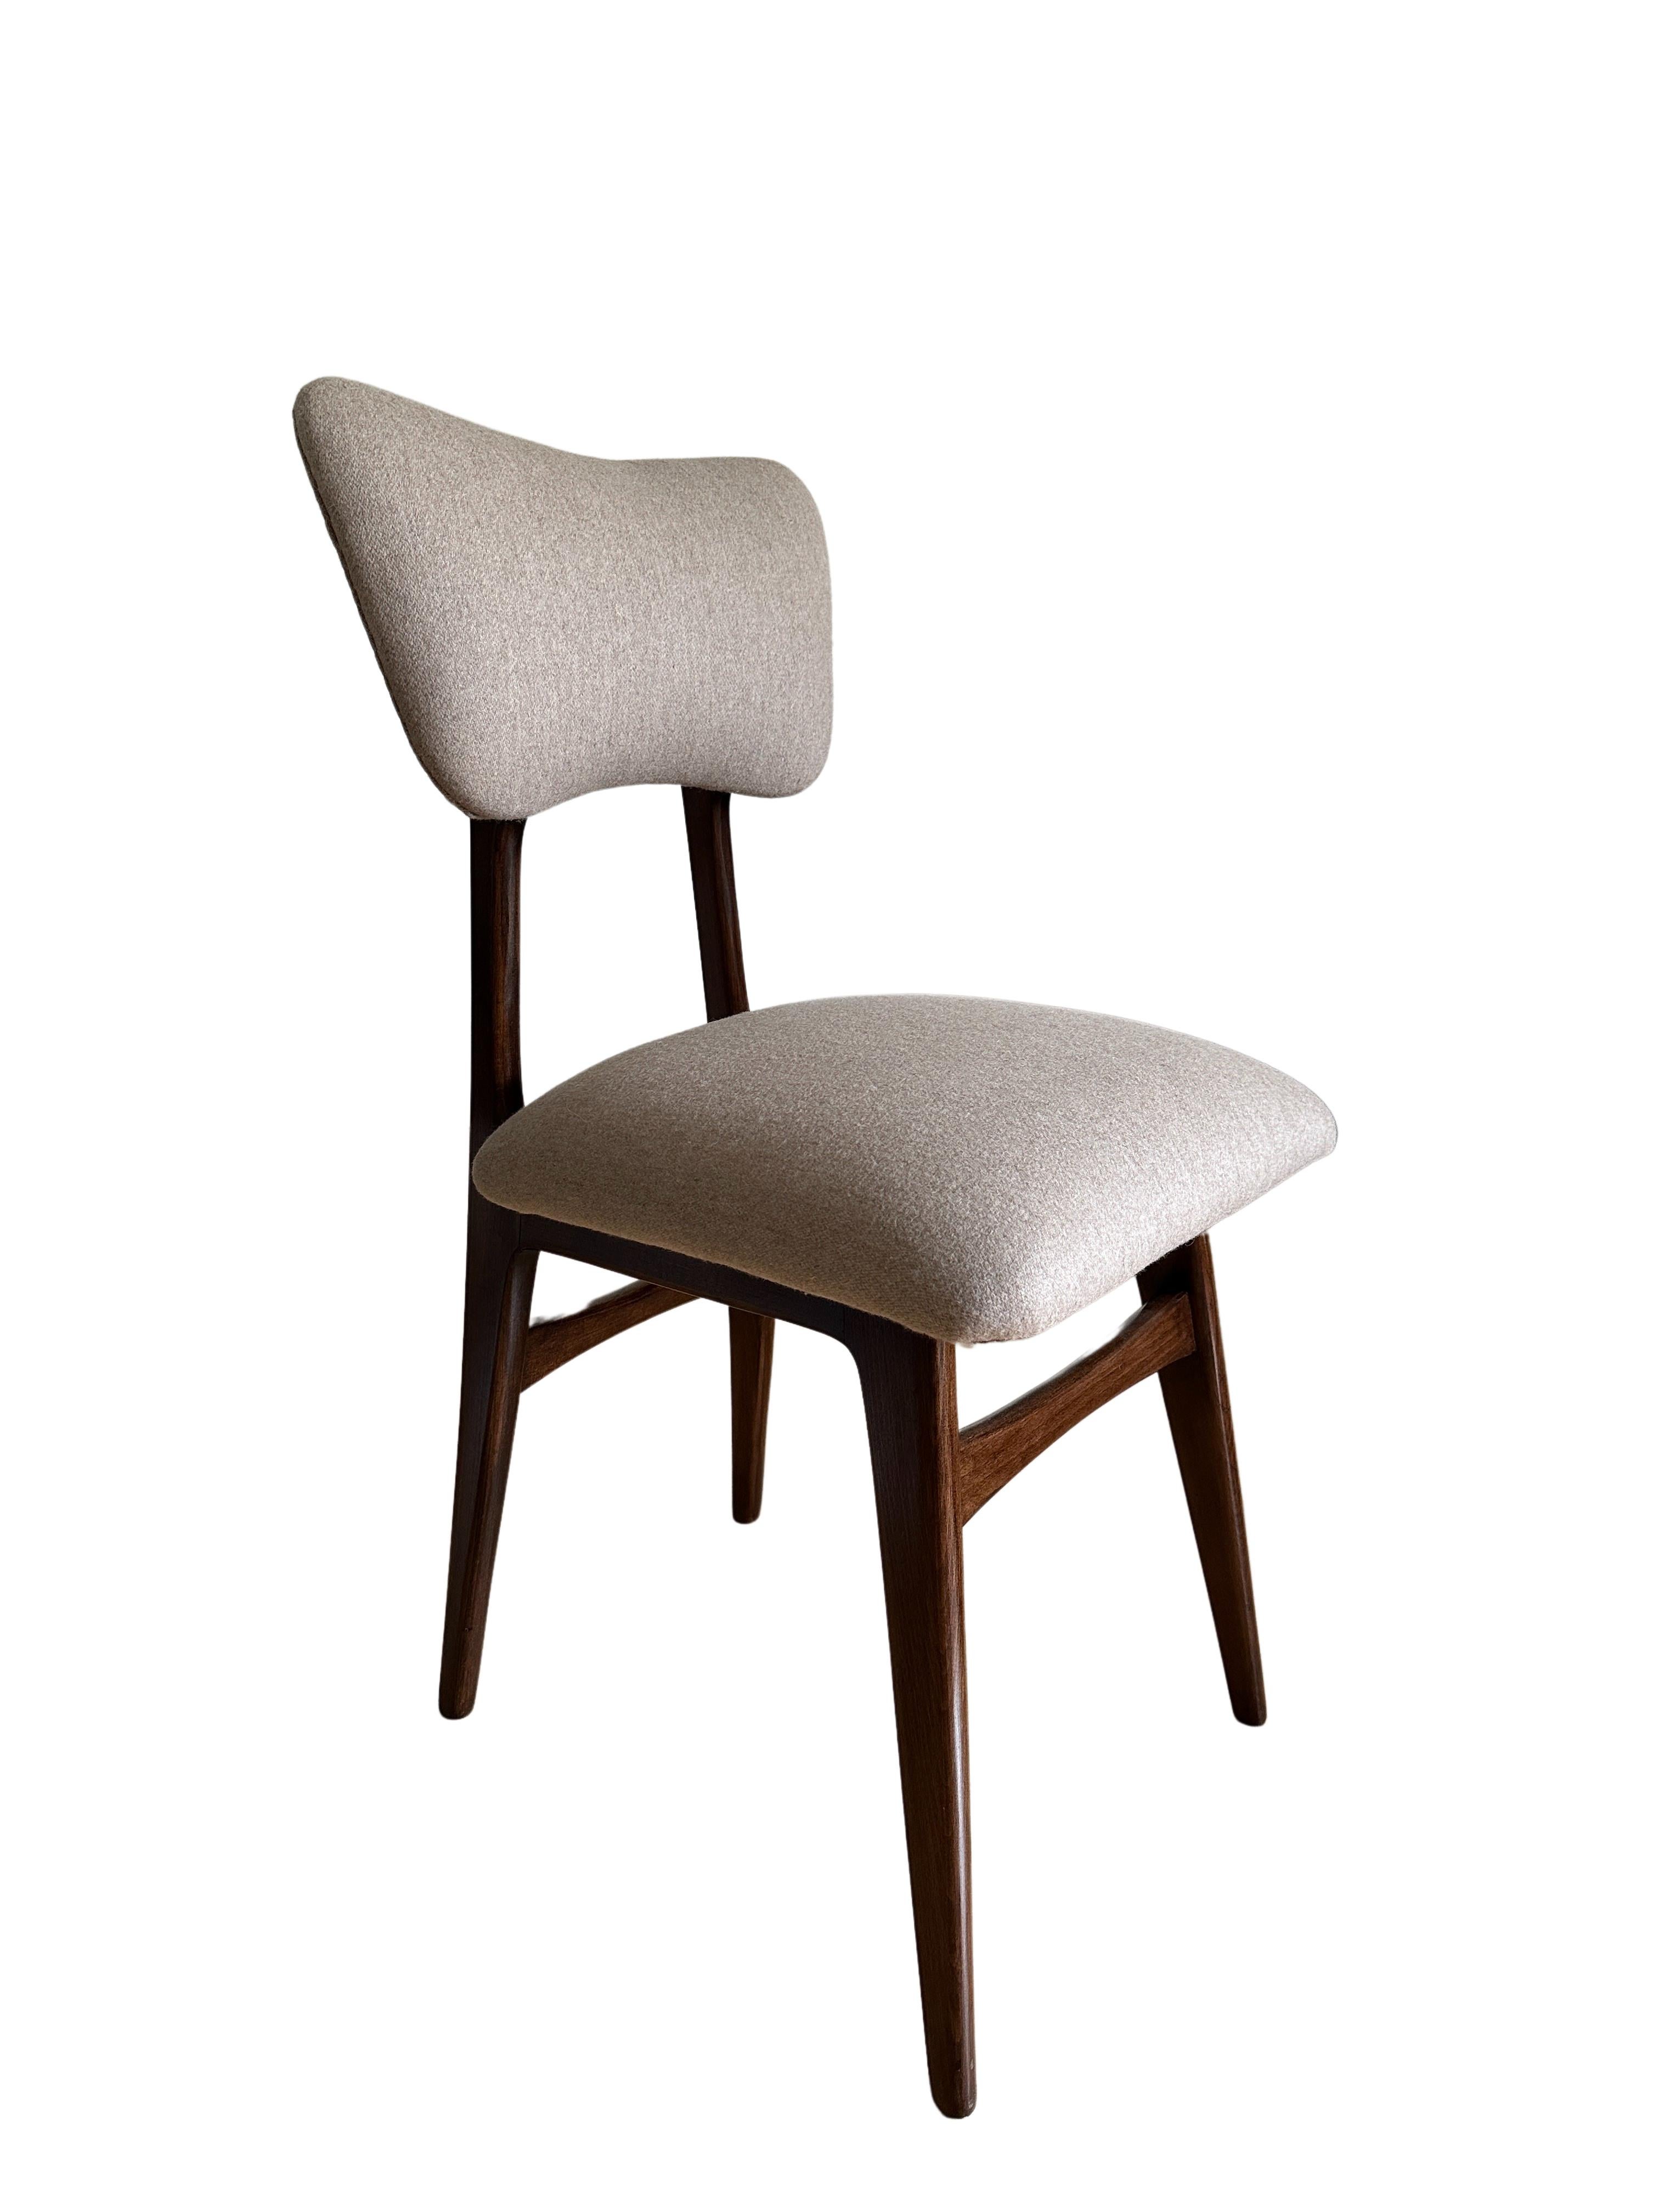 Set of Two Midcentury Dining Chairs in Beige Wool Upholstery, Poland, 1960s For Sale 6